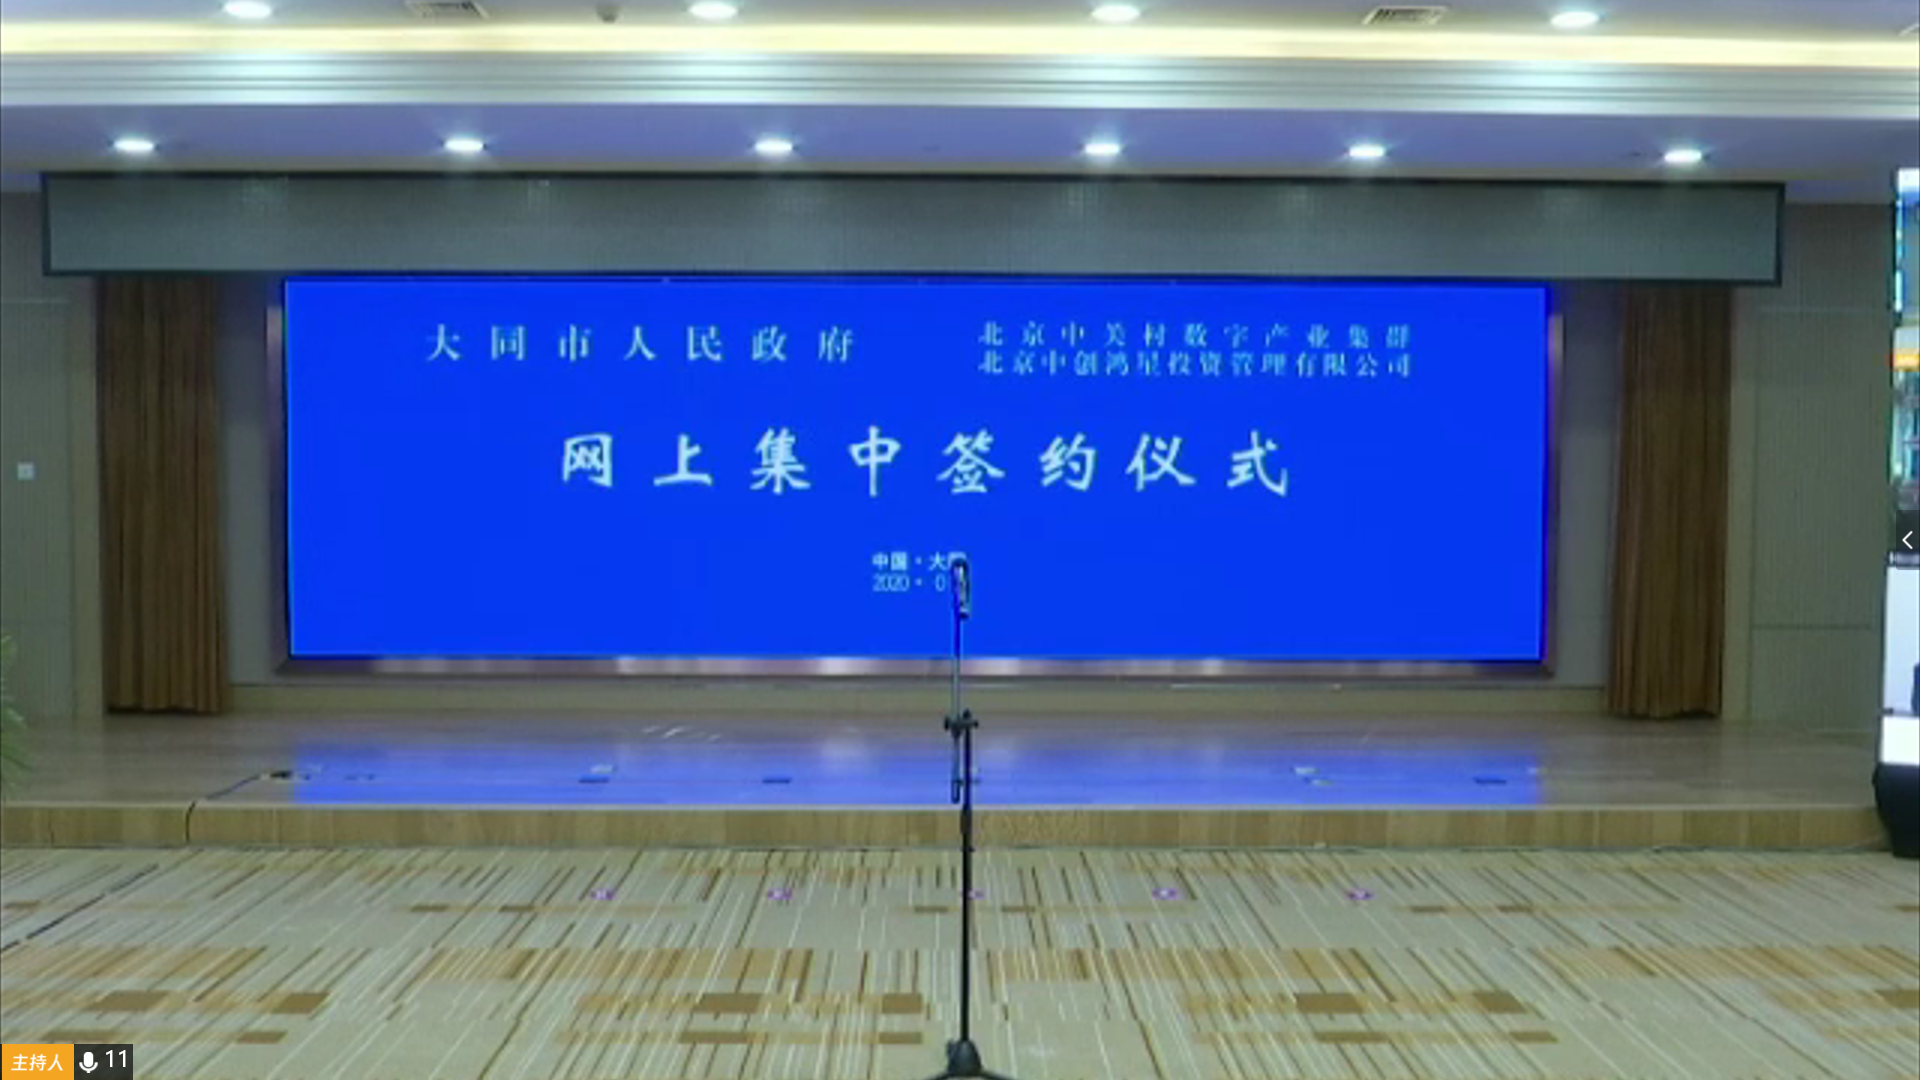 China Union of science and technology was invited to participate in the online signing ceremony of 22 investment promotion projects in Datong City